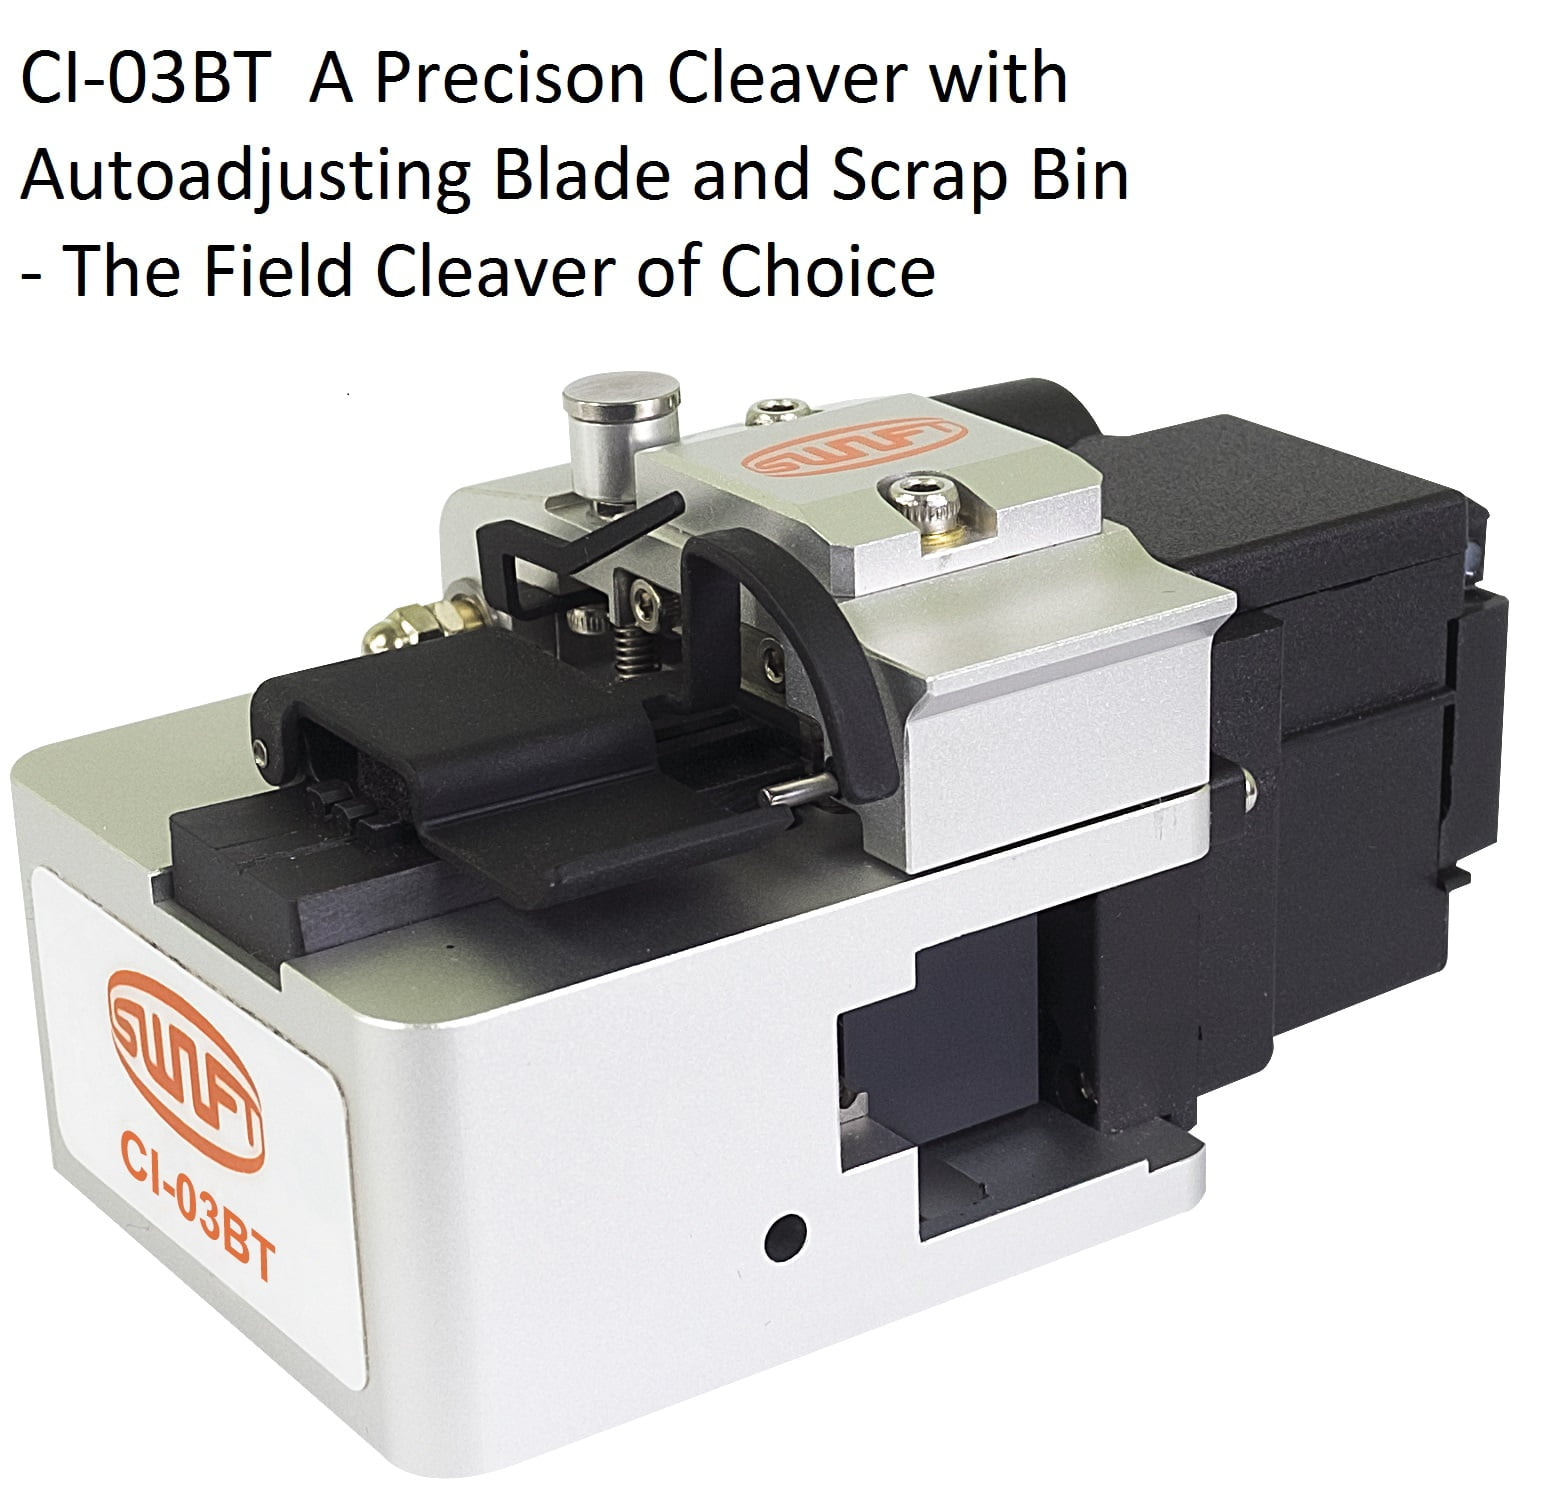 ci-03bt precision fibre cleaver with autorotating blade produces 75,000 cleaves and no manual adjustment is necessary